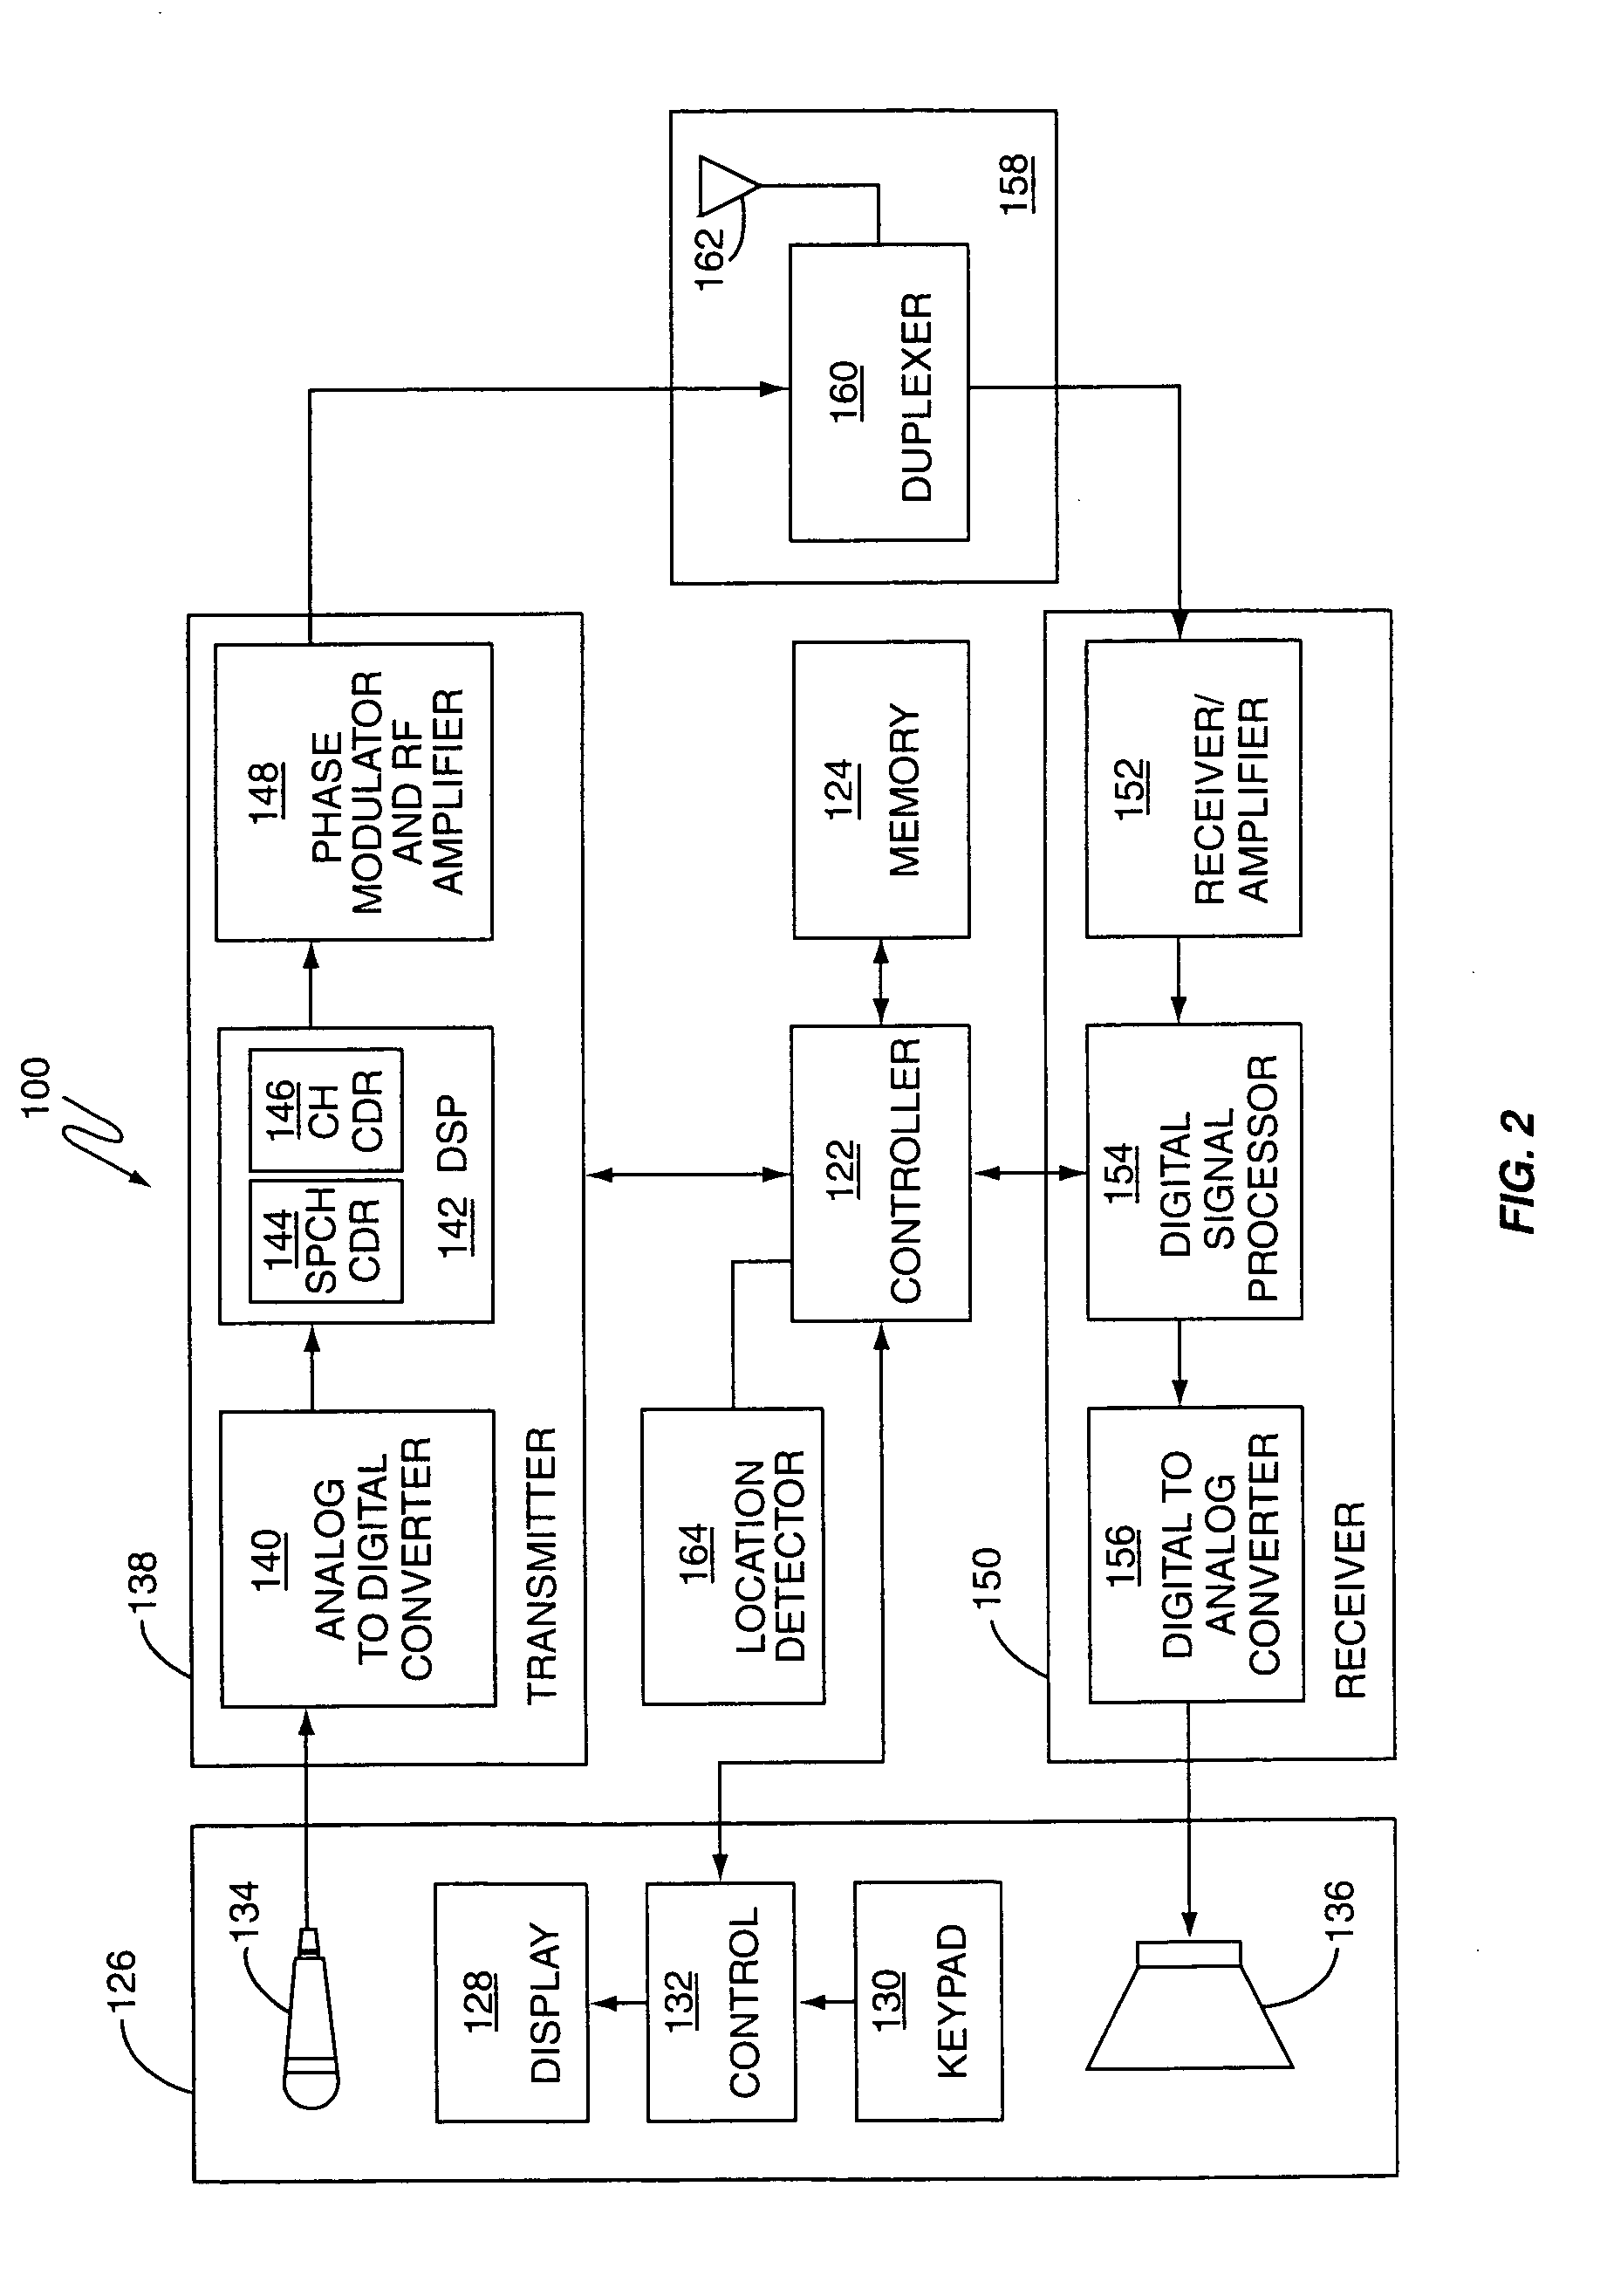 Position detection system integrated into mobile terminal